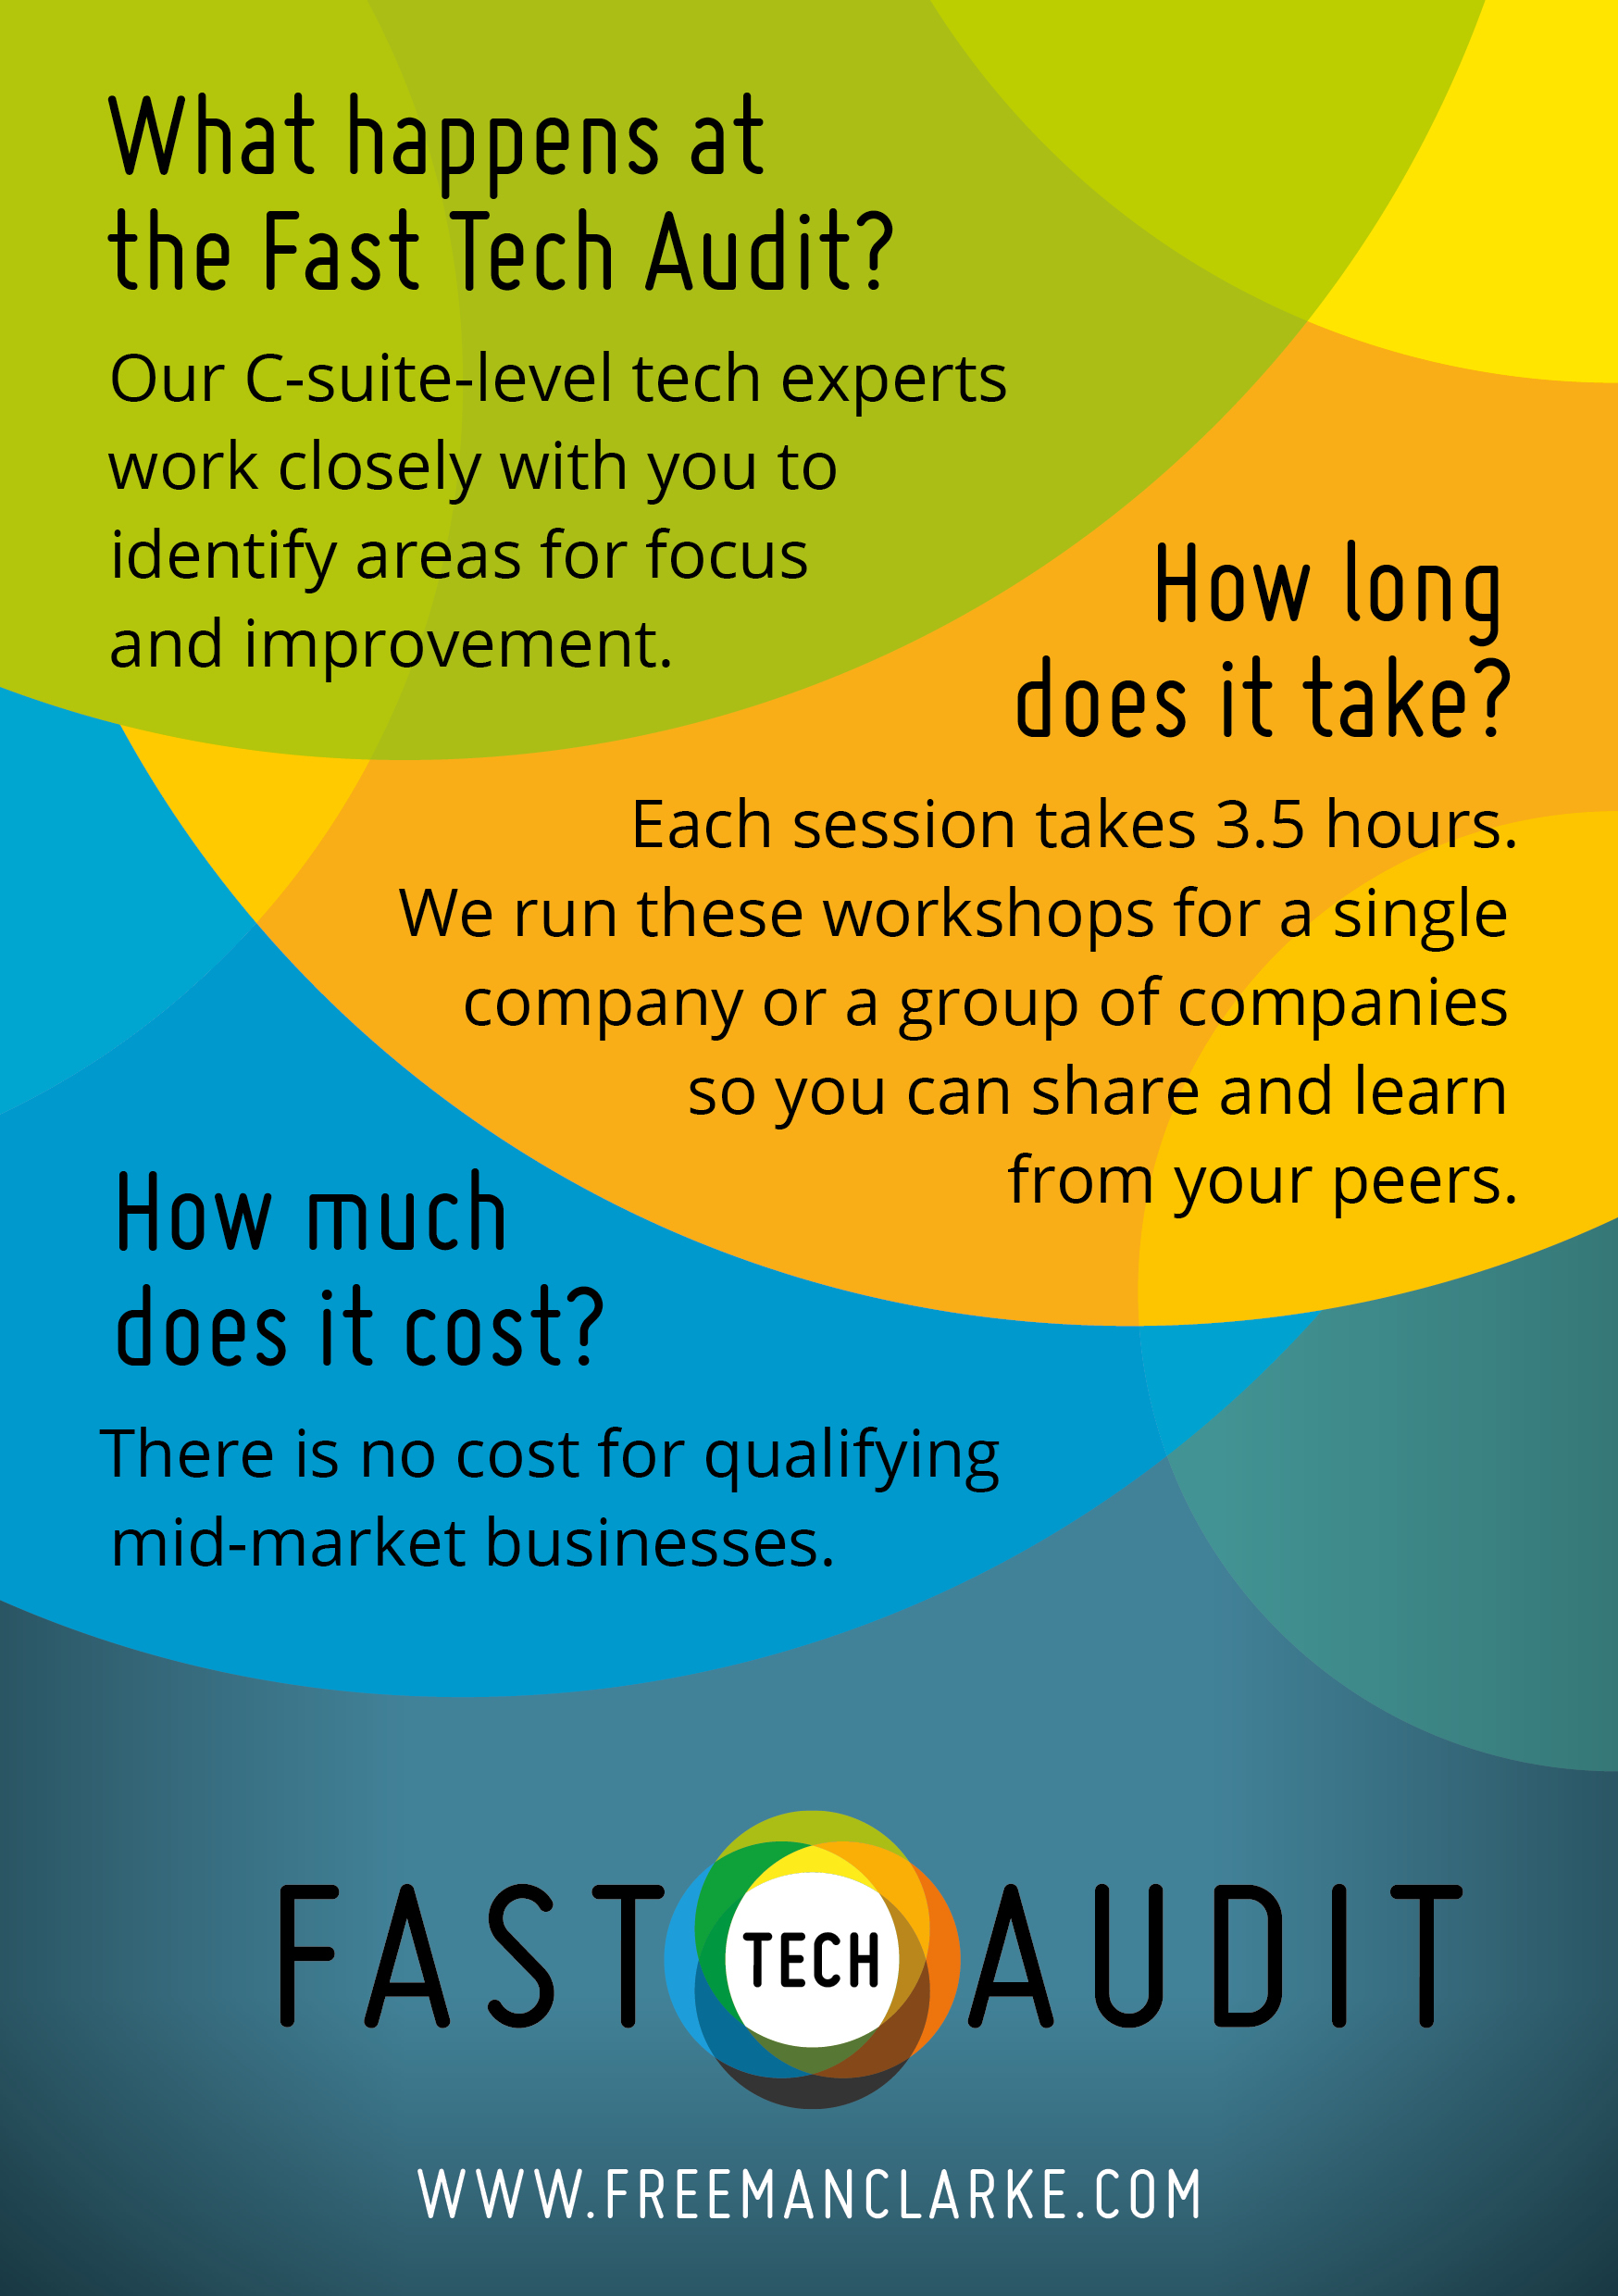 The Fast technology Audit